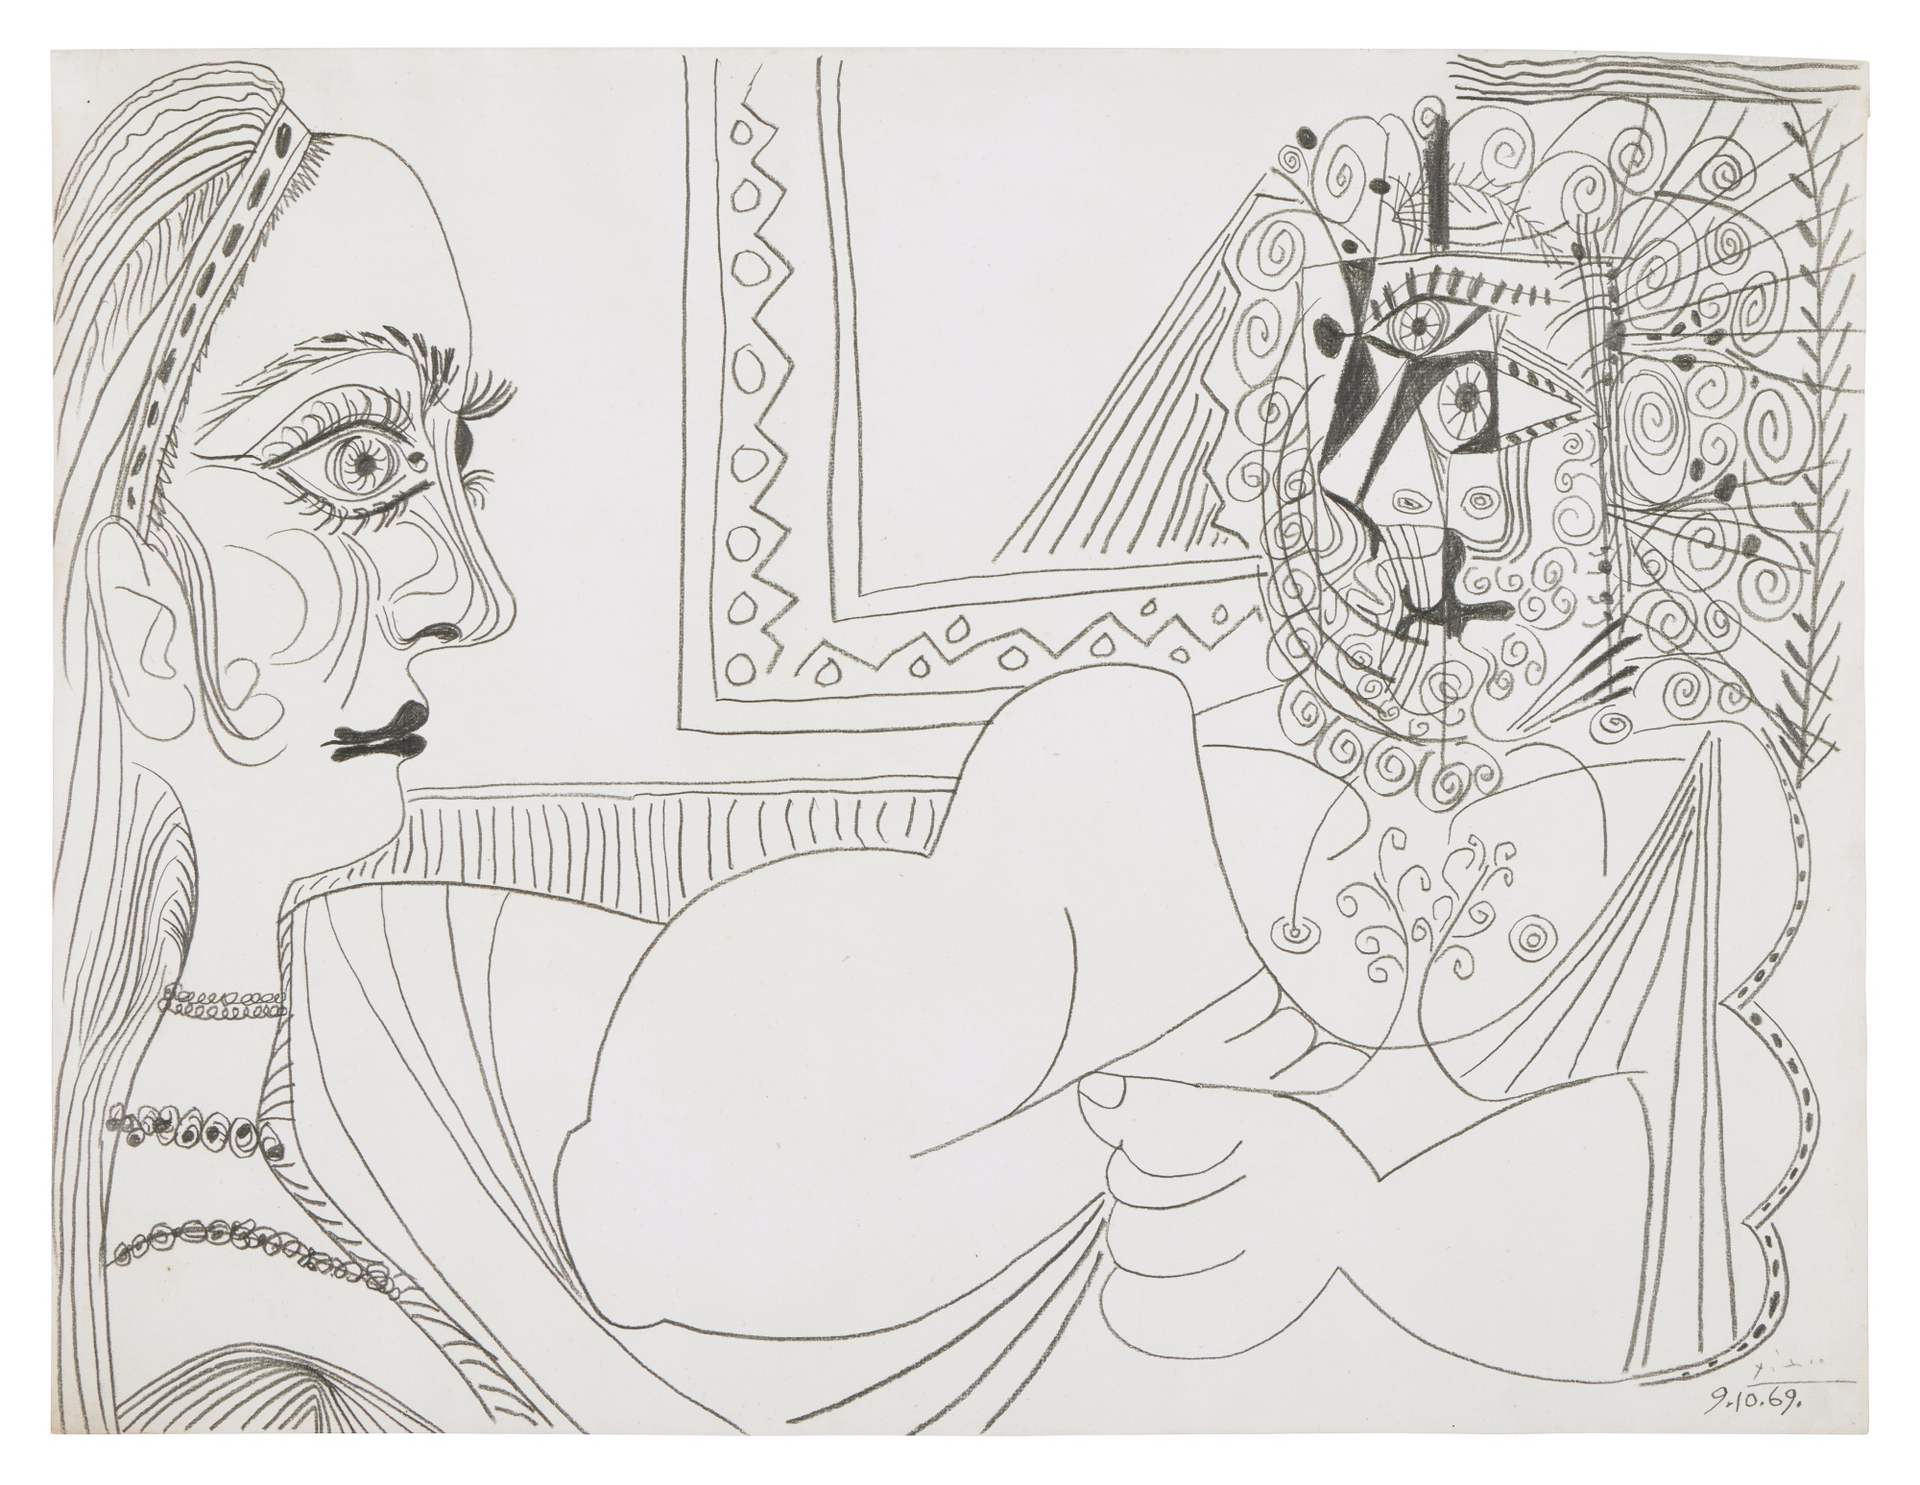 This drawing by Pablo Picasso shows two female figures: one reclines nude to the right, her head becoming increasingly abstracted; to the left, a depiction of a girl with big eyes and dark lips observes the scene.